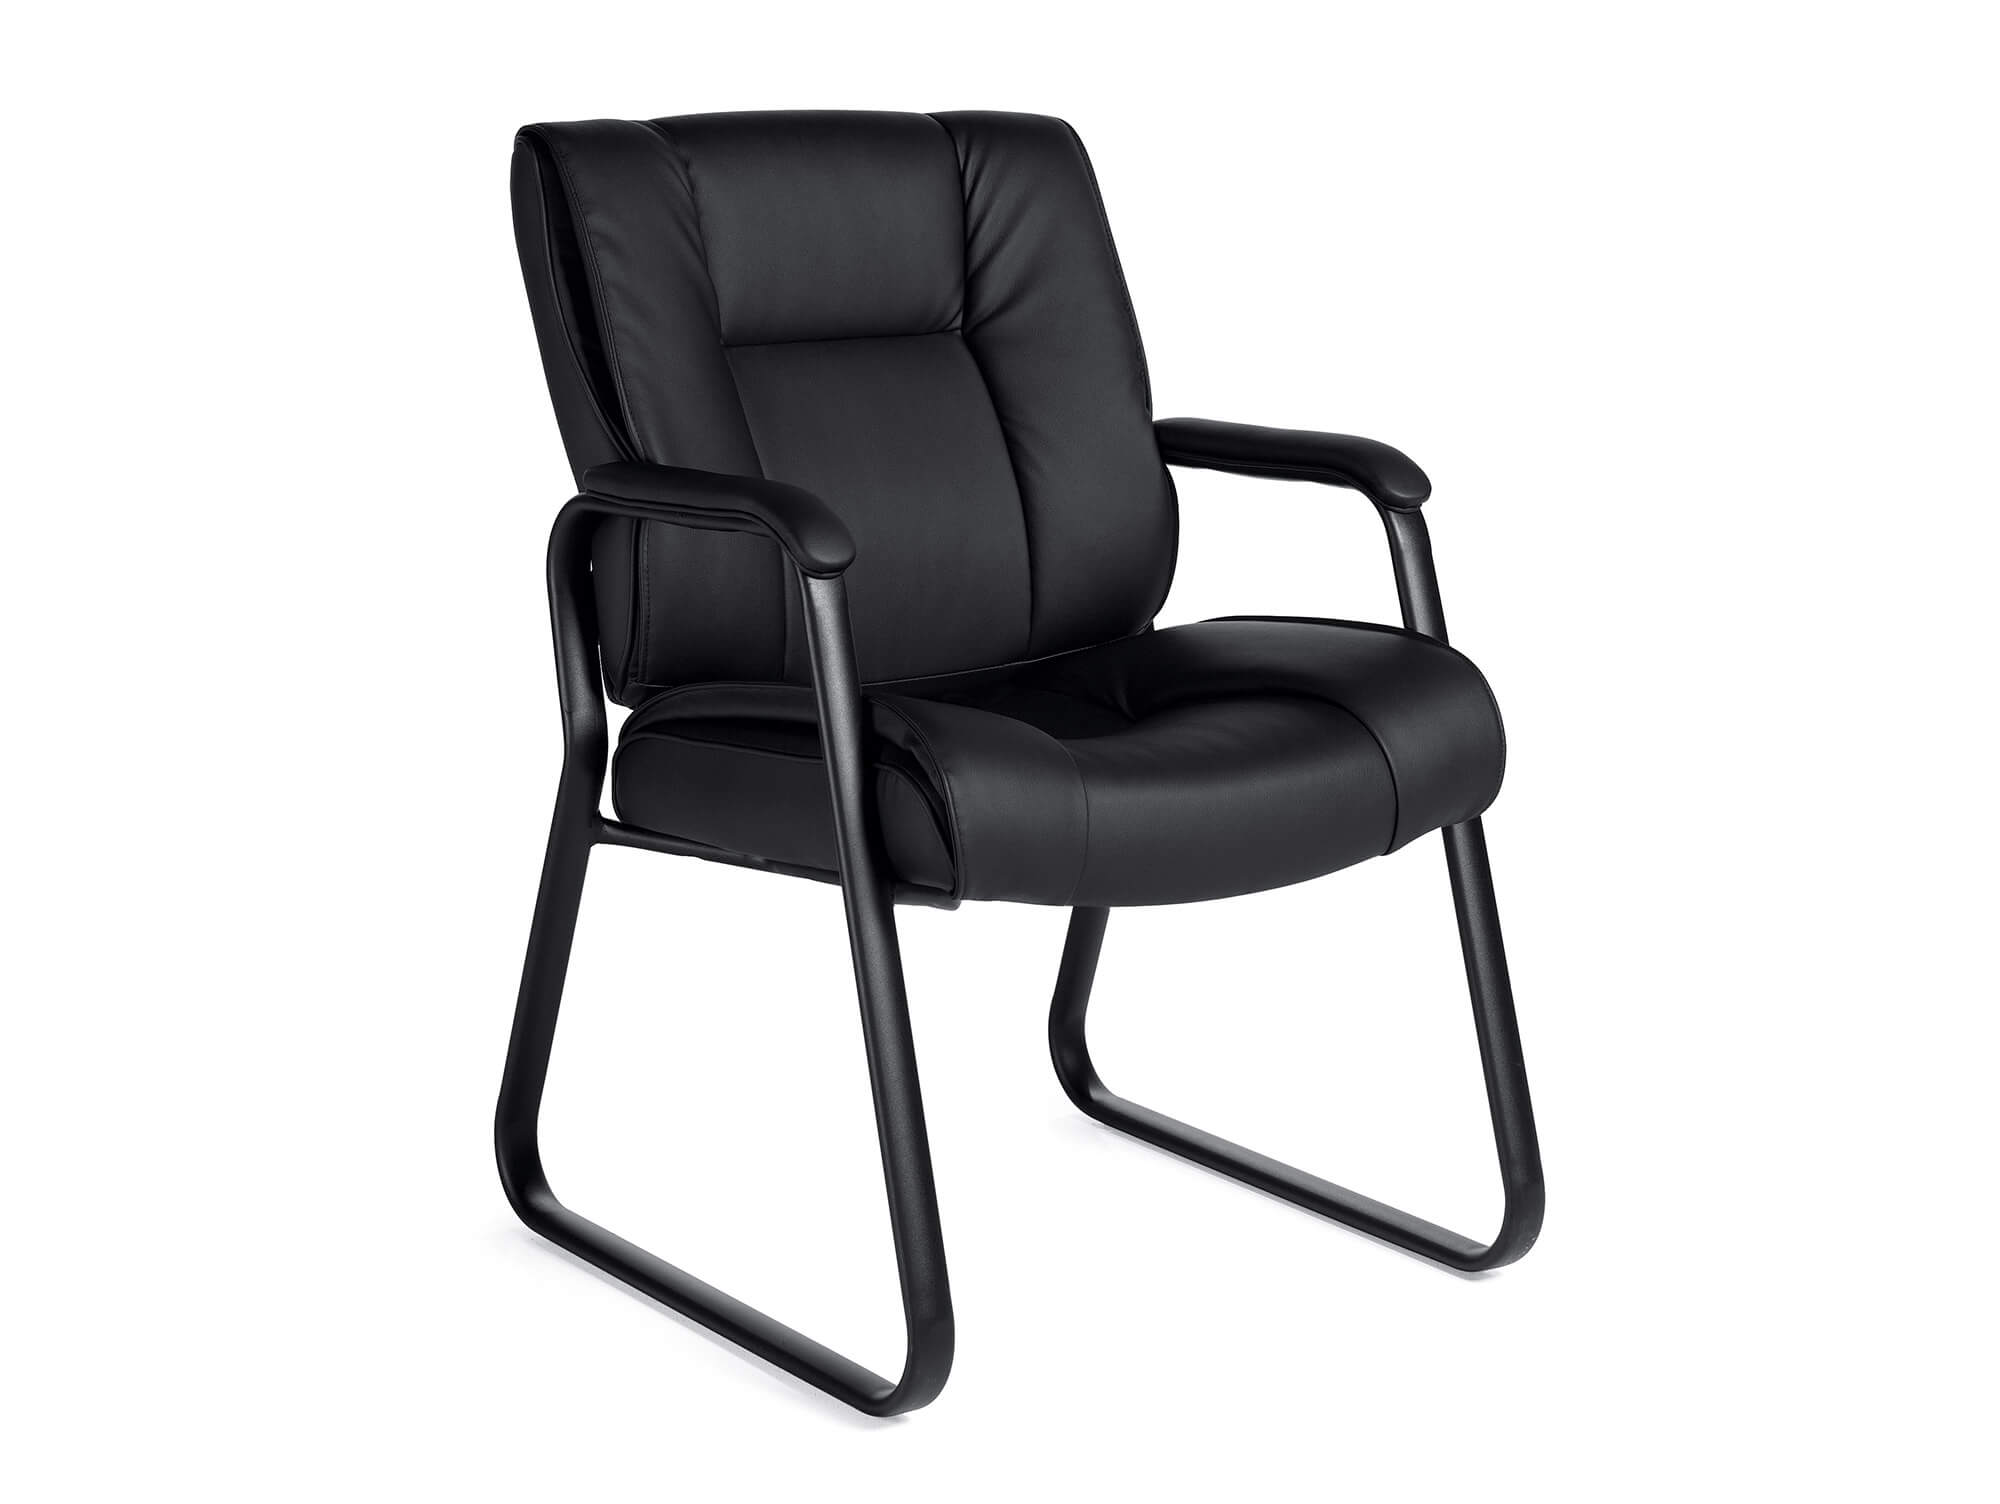 chairs-for-office-reception-chairs.jpg